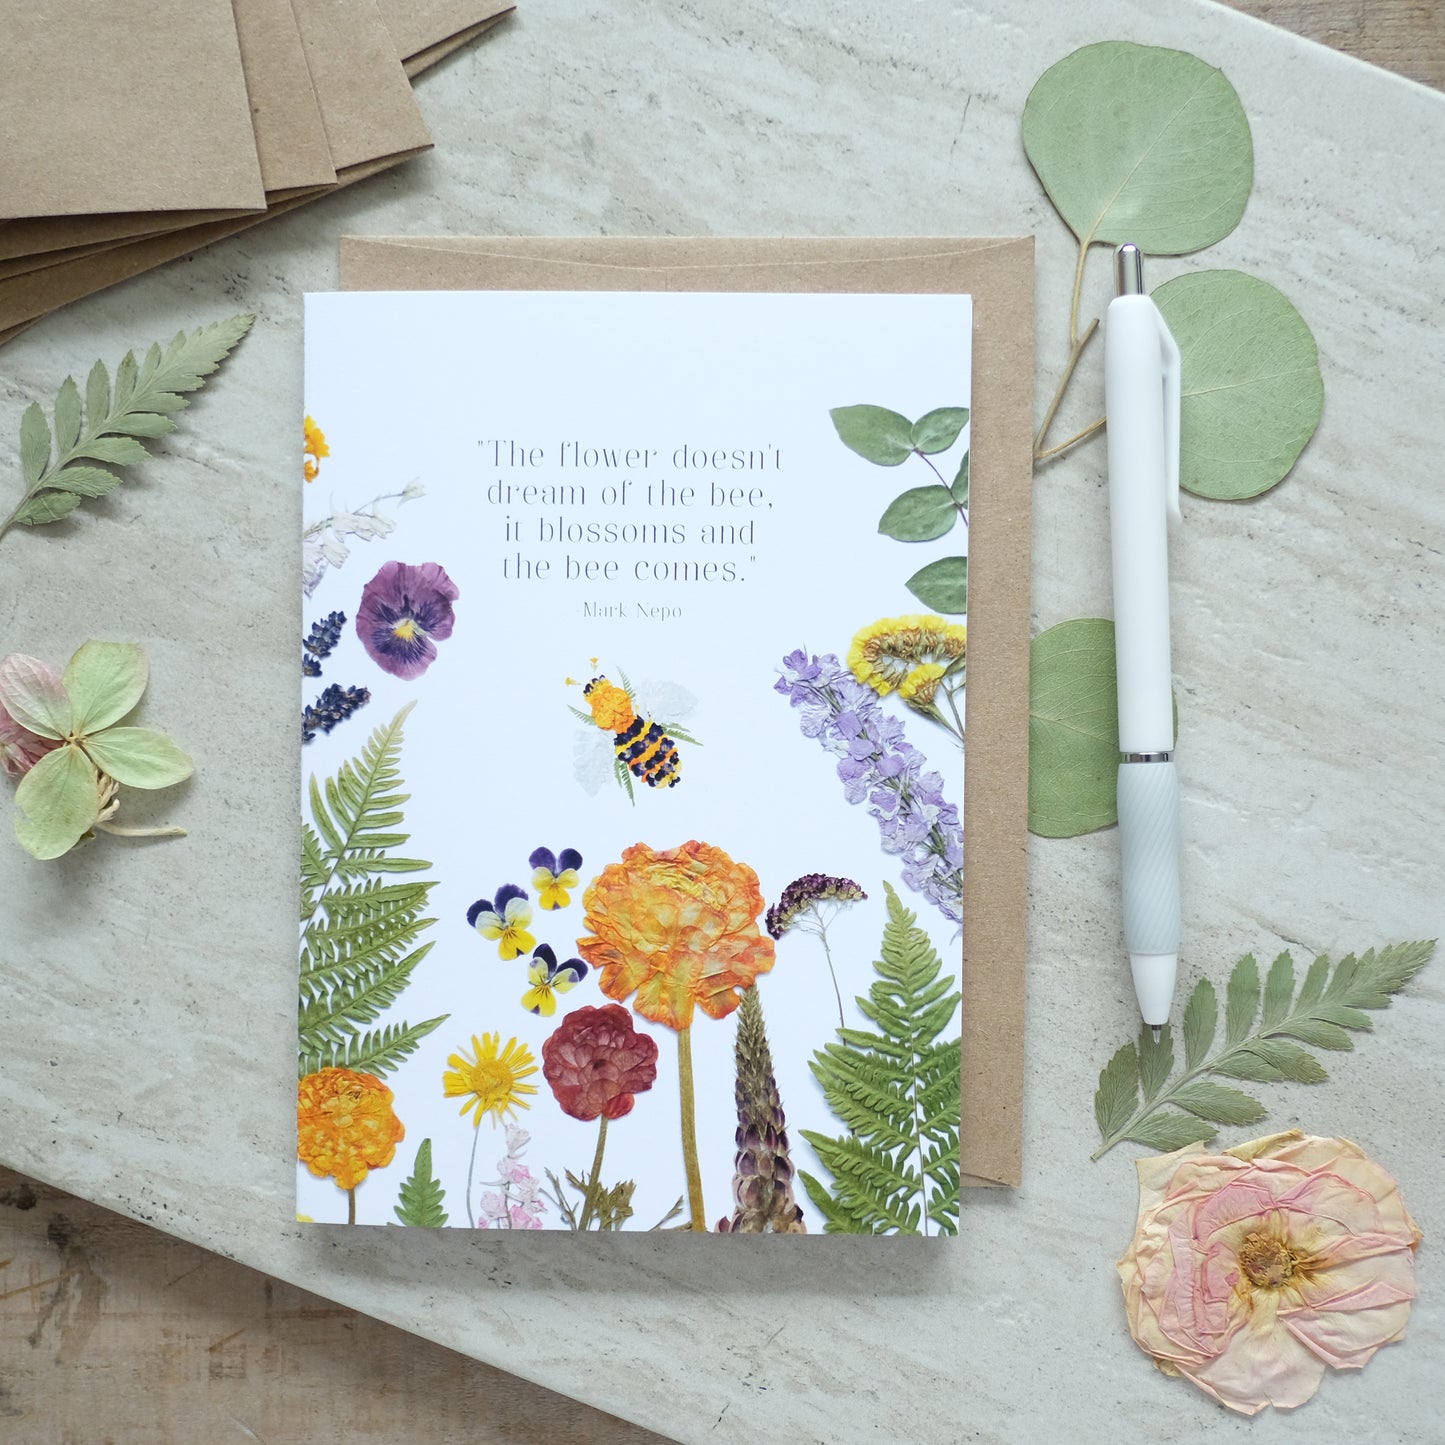 Blossom and The Bee Comes, Everyday Encouragement, Greeting Card